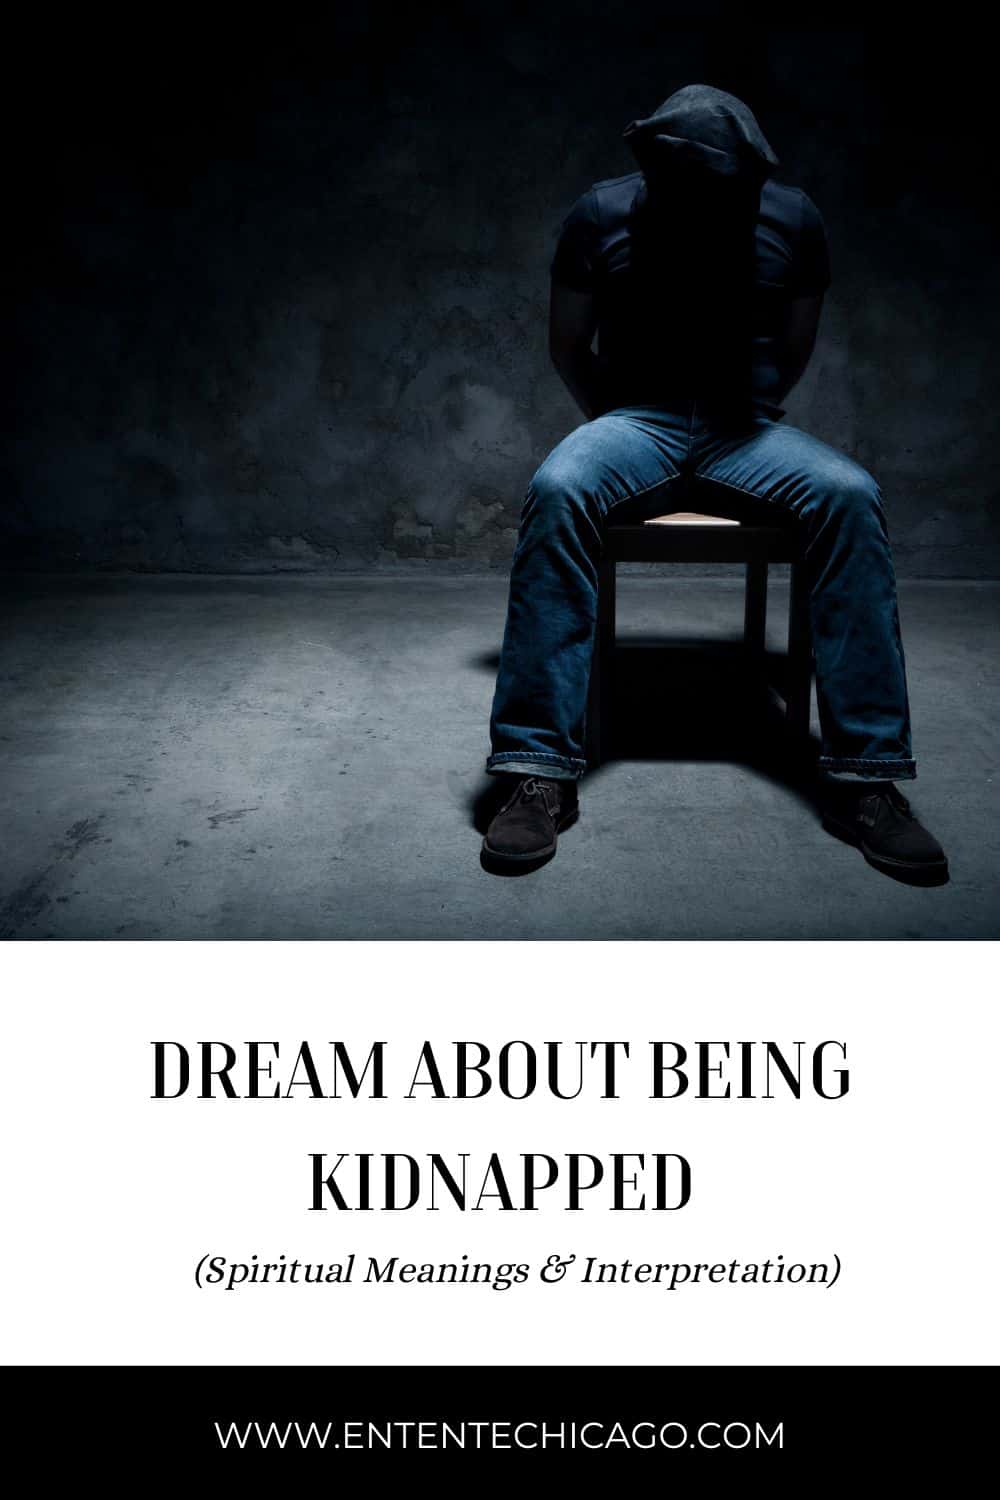 What Does It Mean to Dream About Being Kidnapped